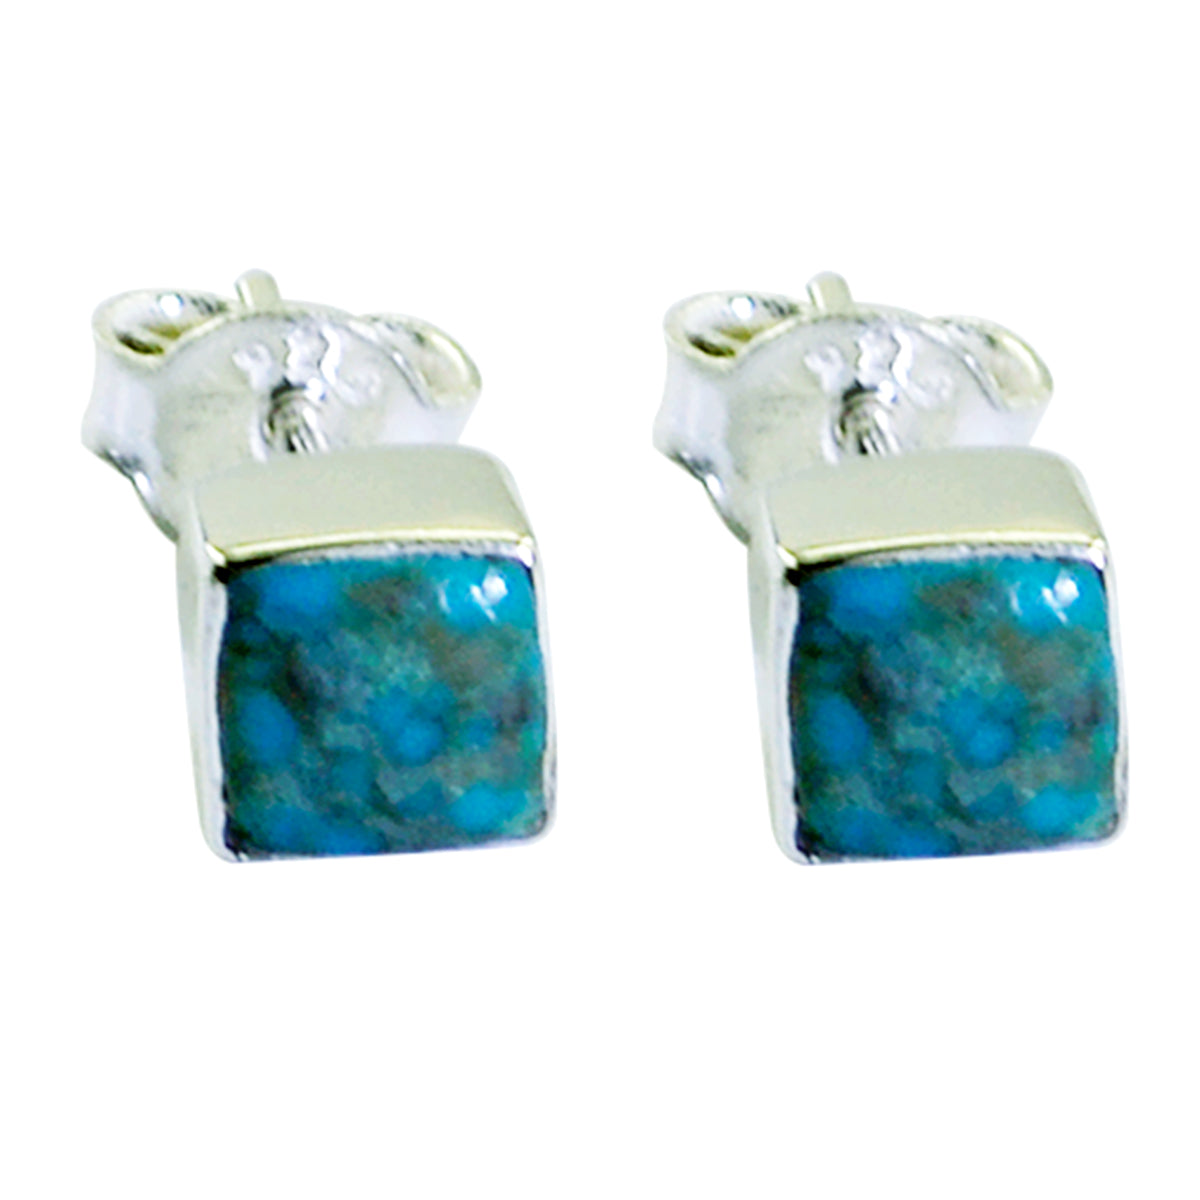 Riyo Nice Gemstone square Cabochon Multi Turquoise Silver Earring gift for boxing day